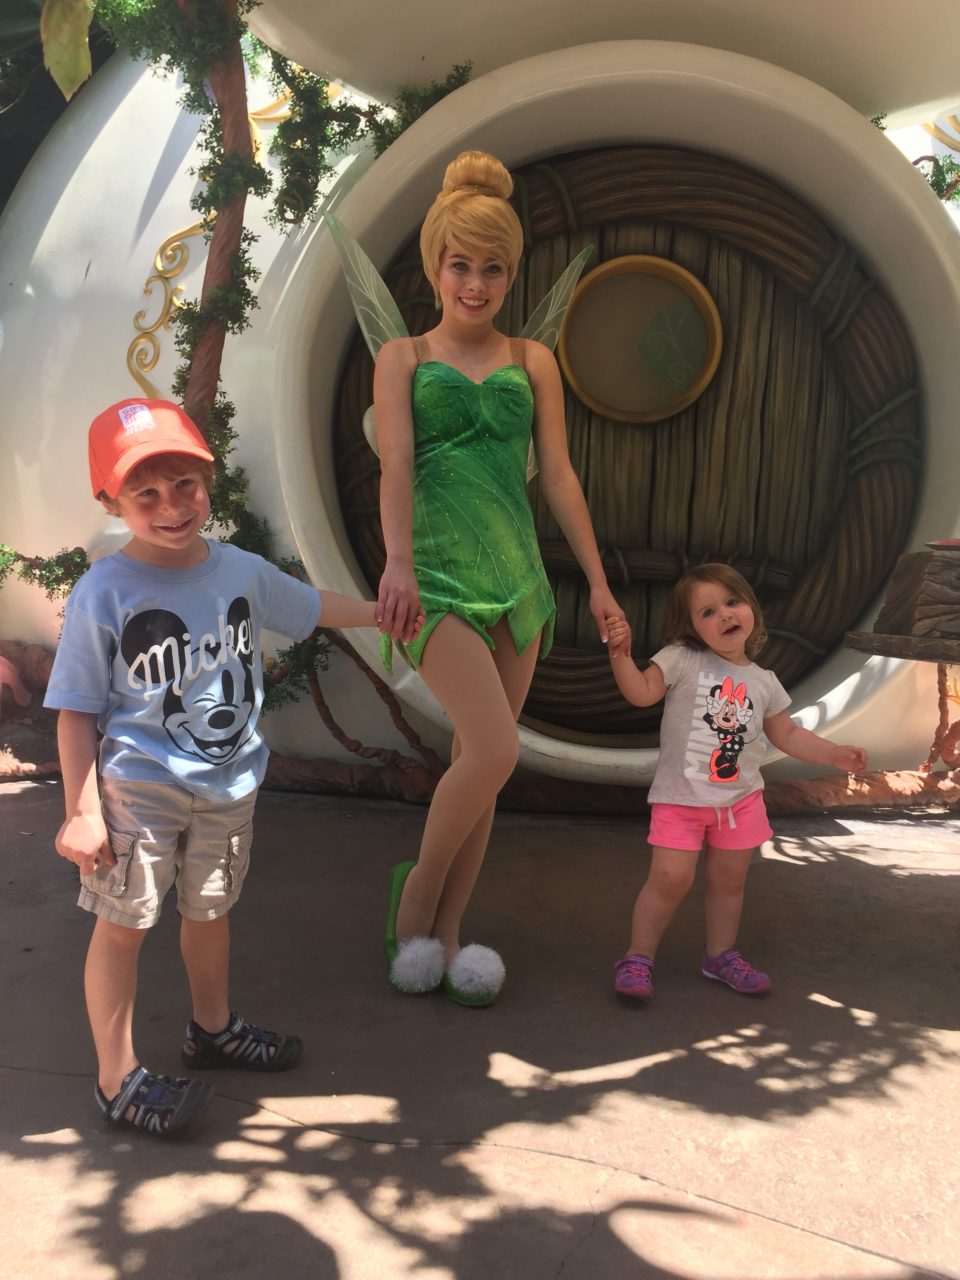 Meeting Tinkerbell was our best character experience at Disneyland